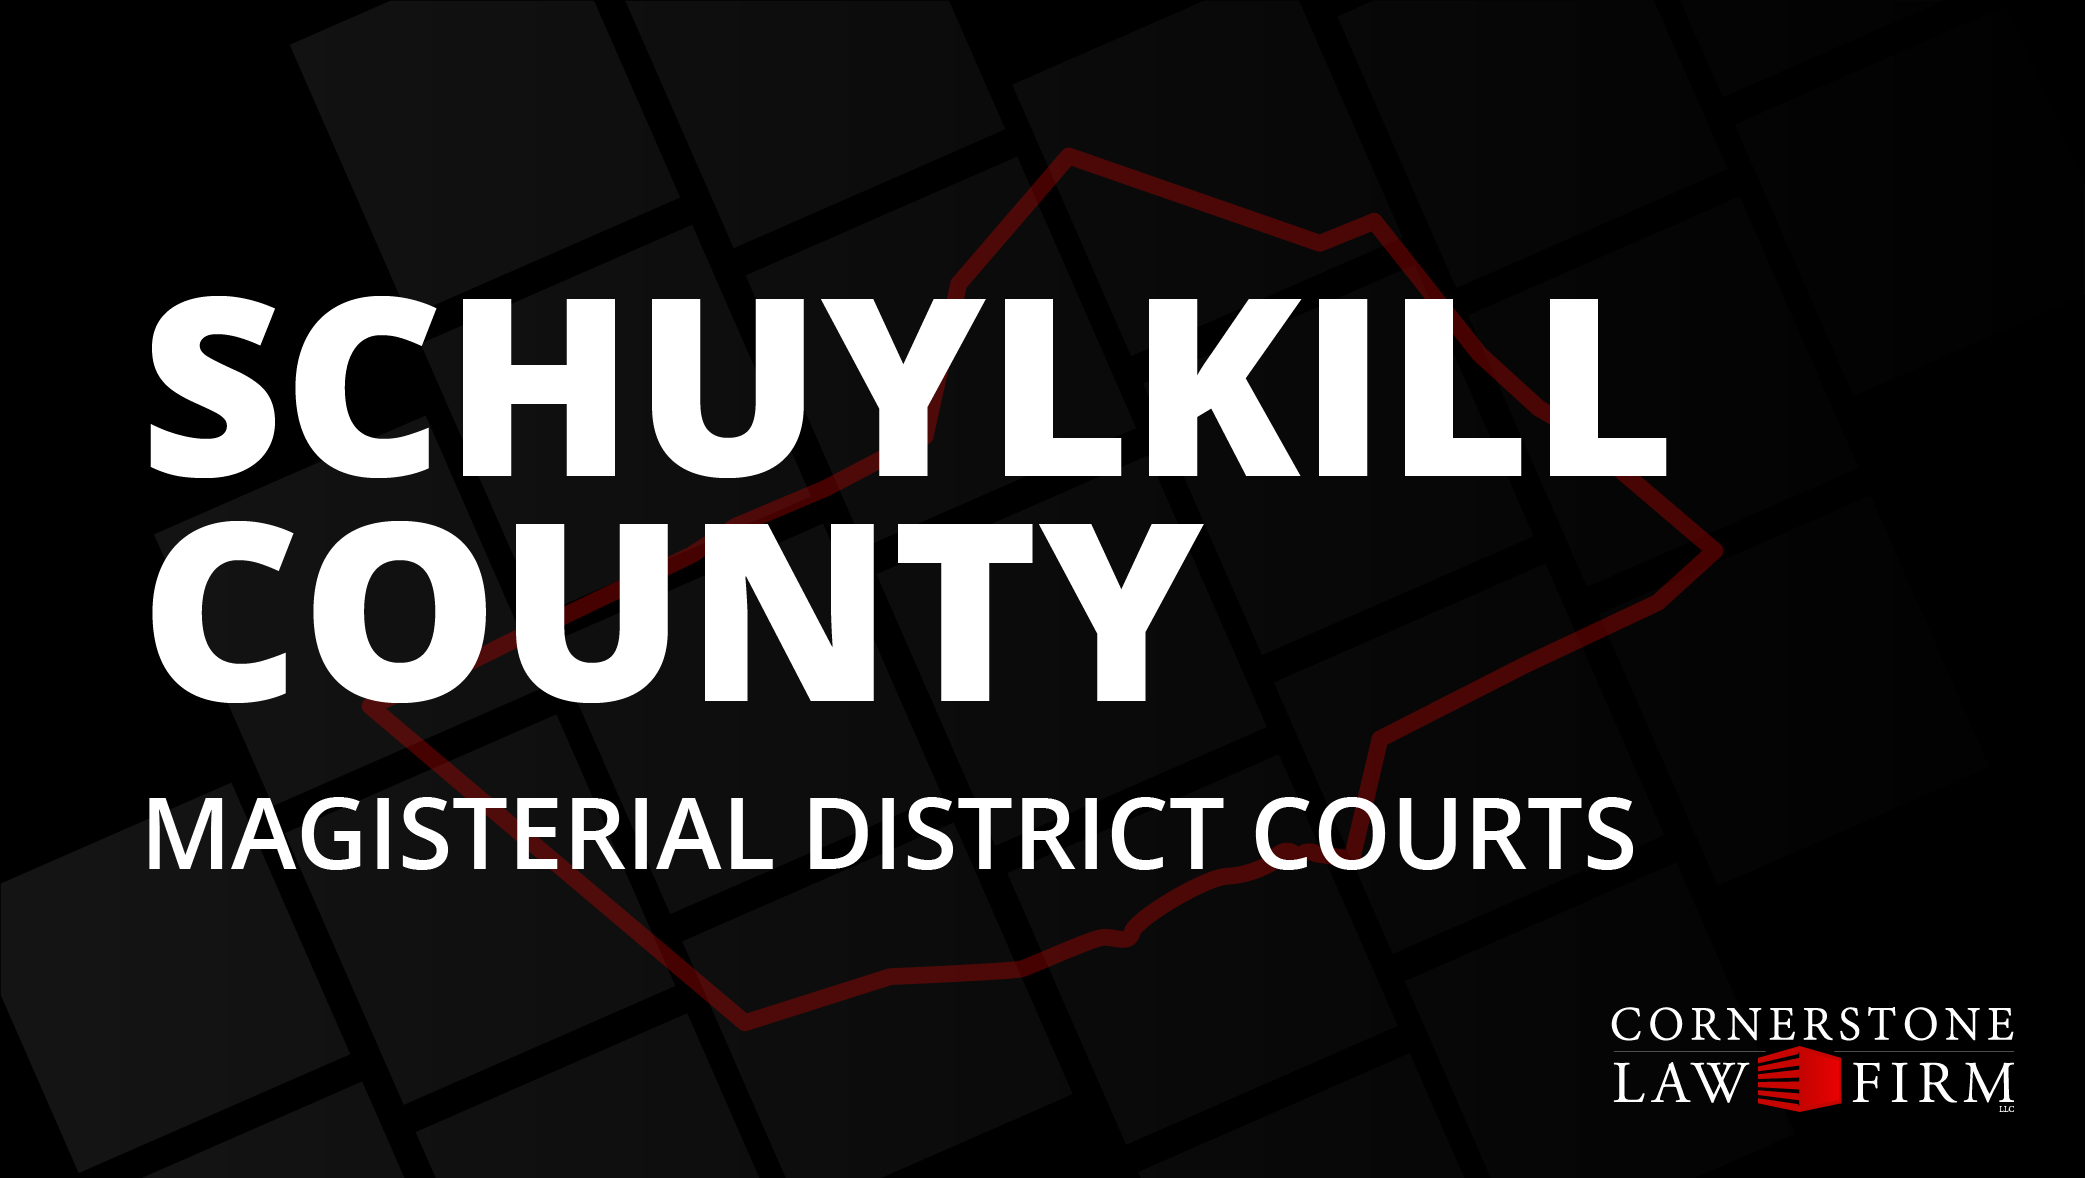 The words "Schuylkill County Magisterial District Courts" over a black background with a faded red outline of the county.